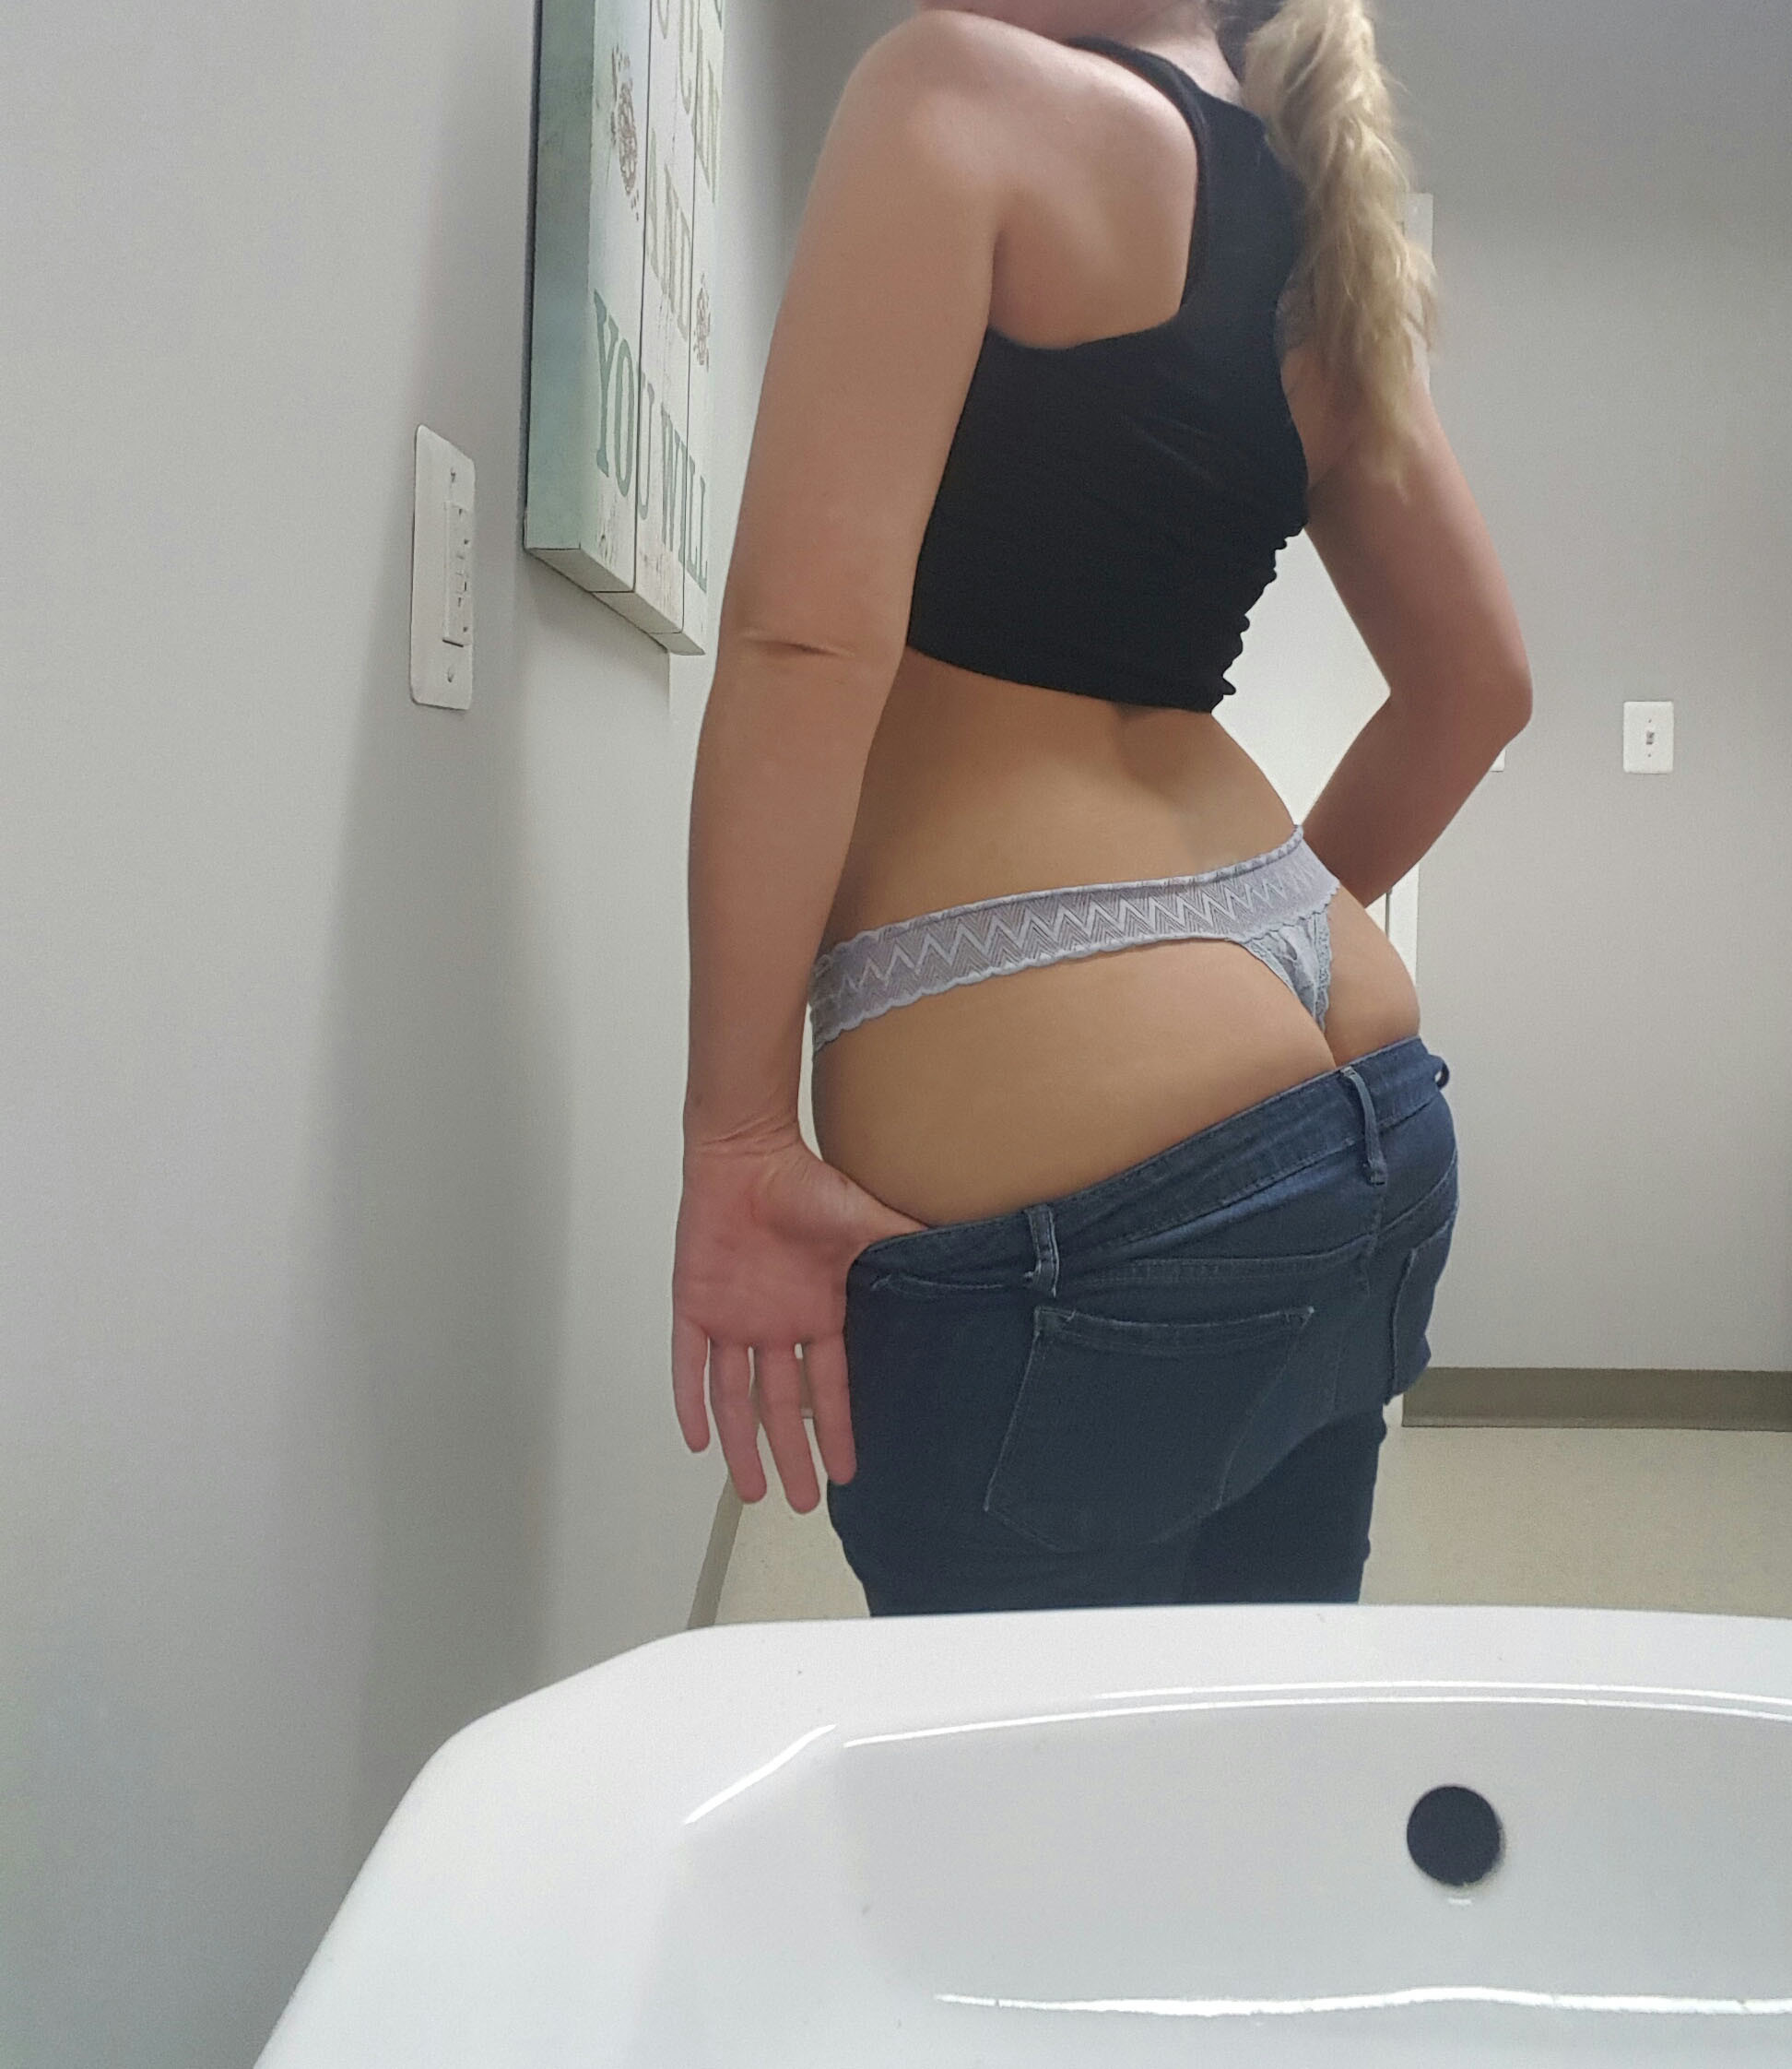 Lonely At Work Blonde Wifey